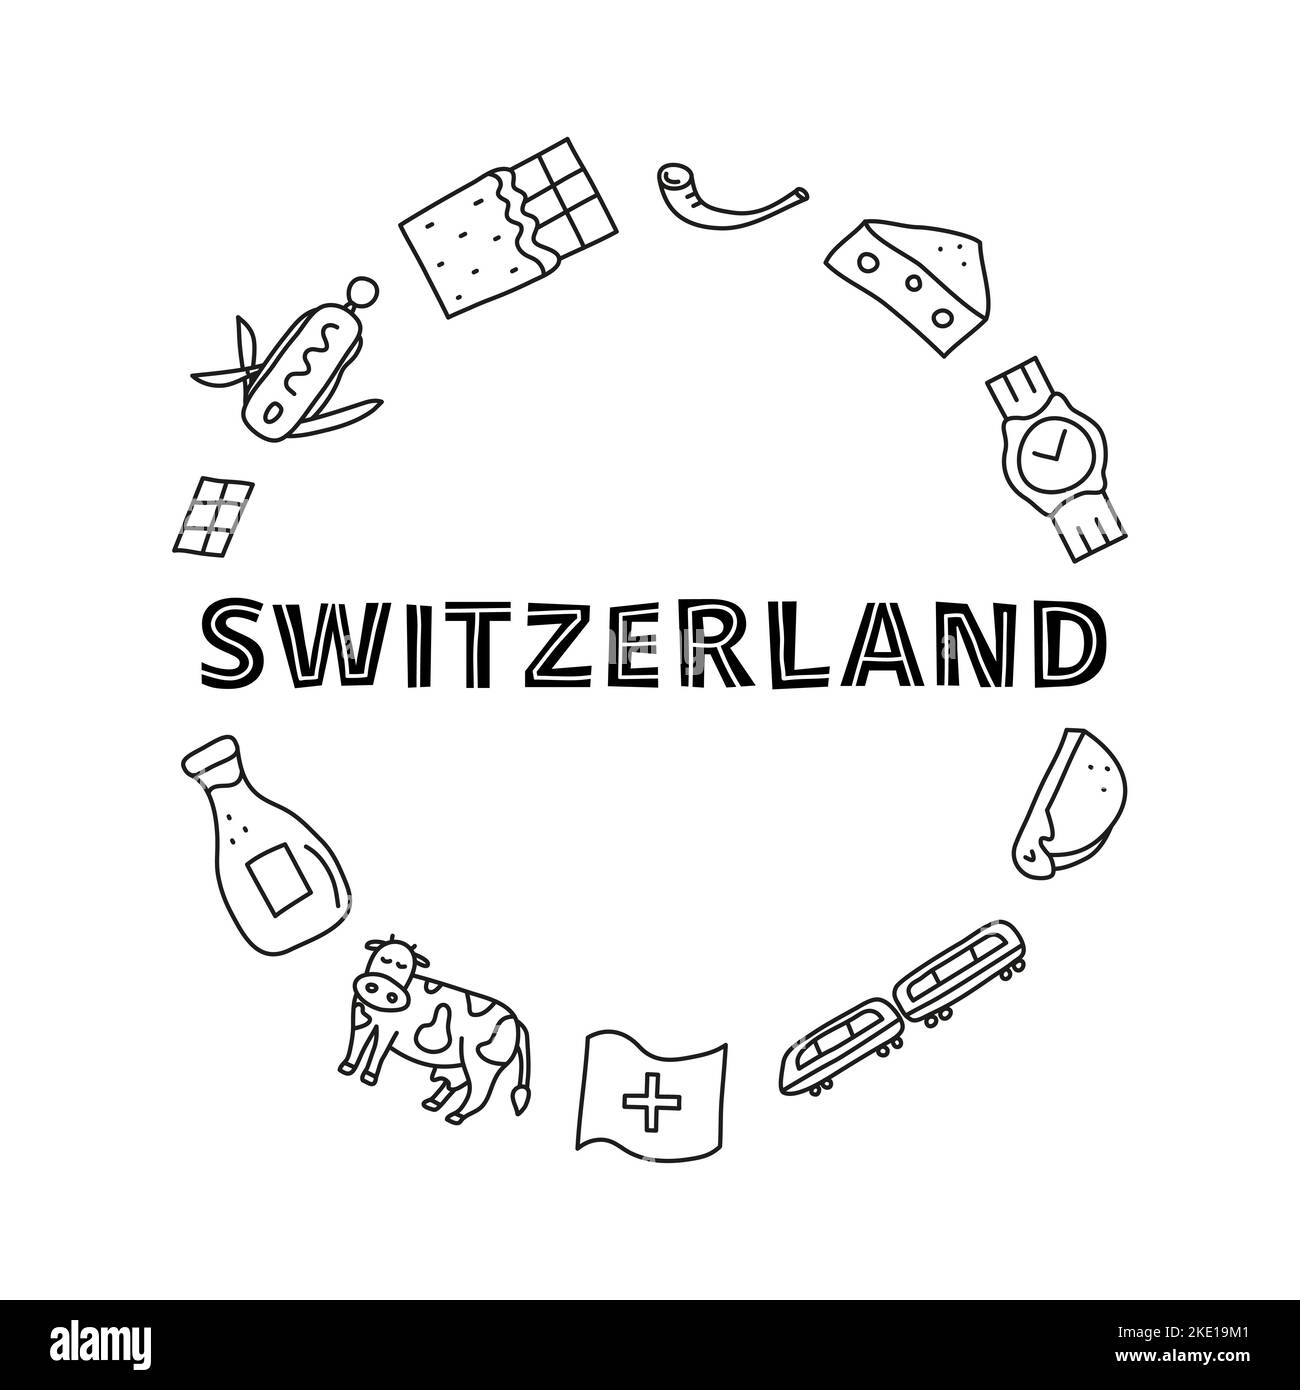 Doodle outline Switzerland travel icons including cheese, chocolate, cable car, train, cow, fondue, alphorn, milk, watch composed in circle shape. Stock Vector